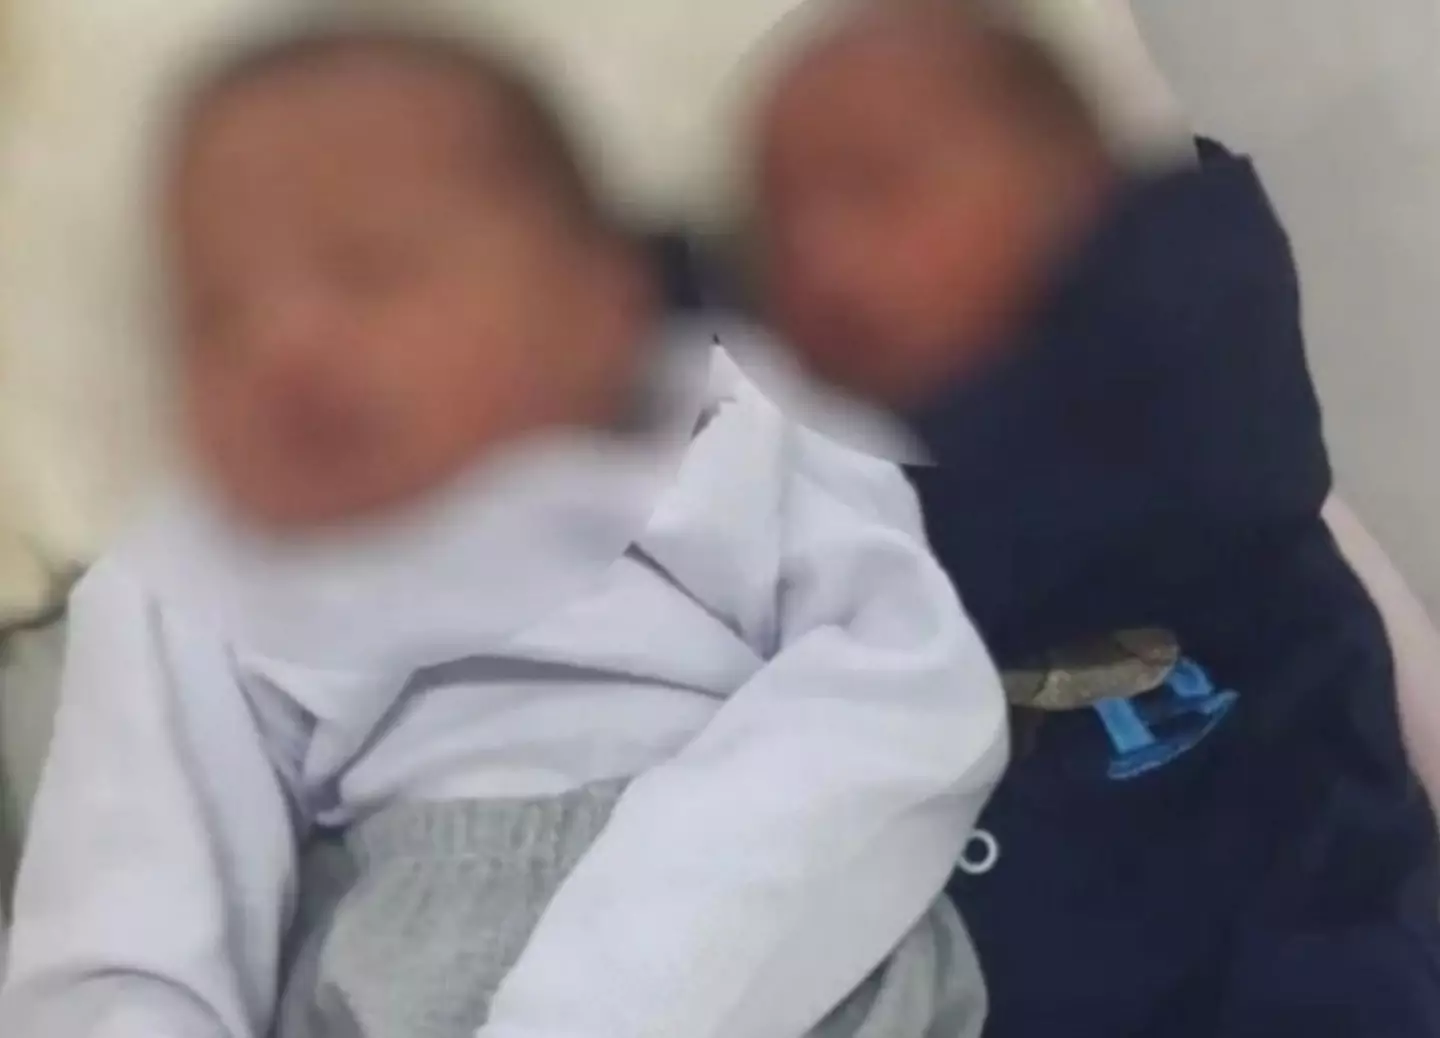 The woman gave birth a set of twins from two fathers.